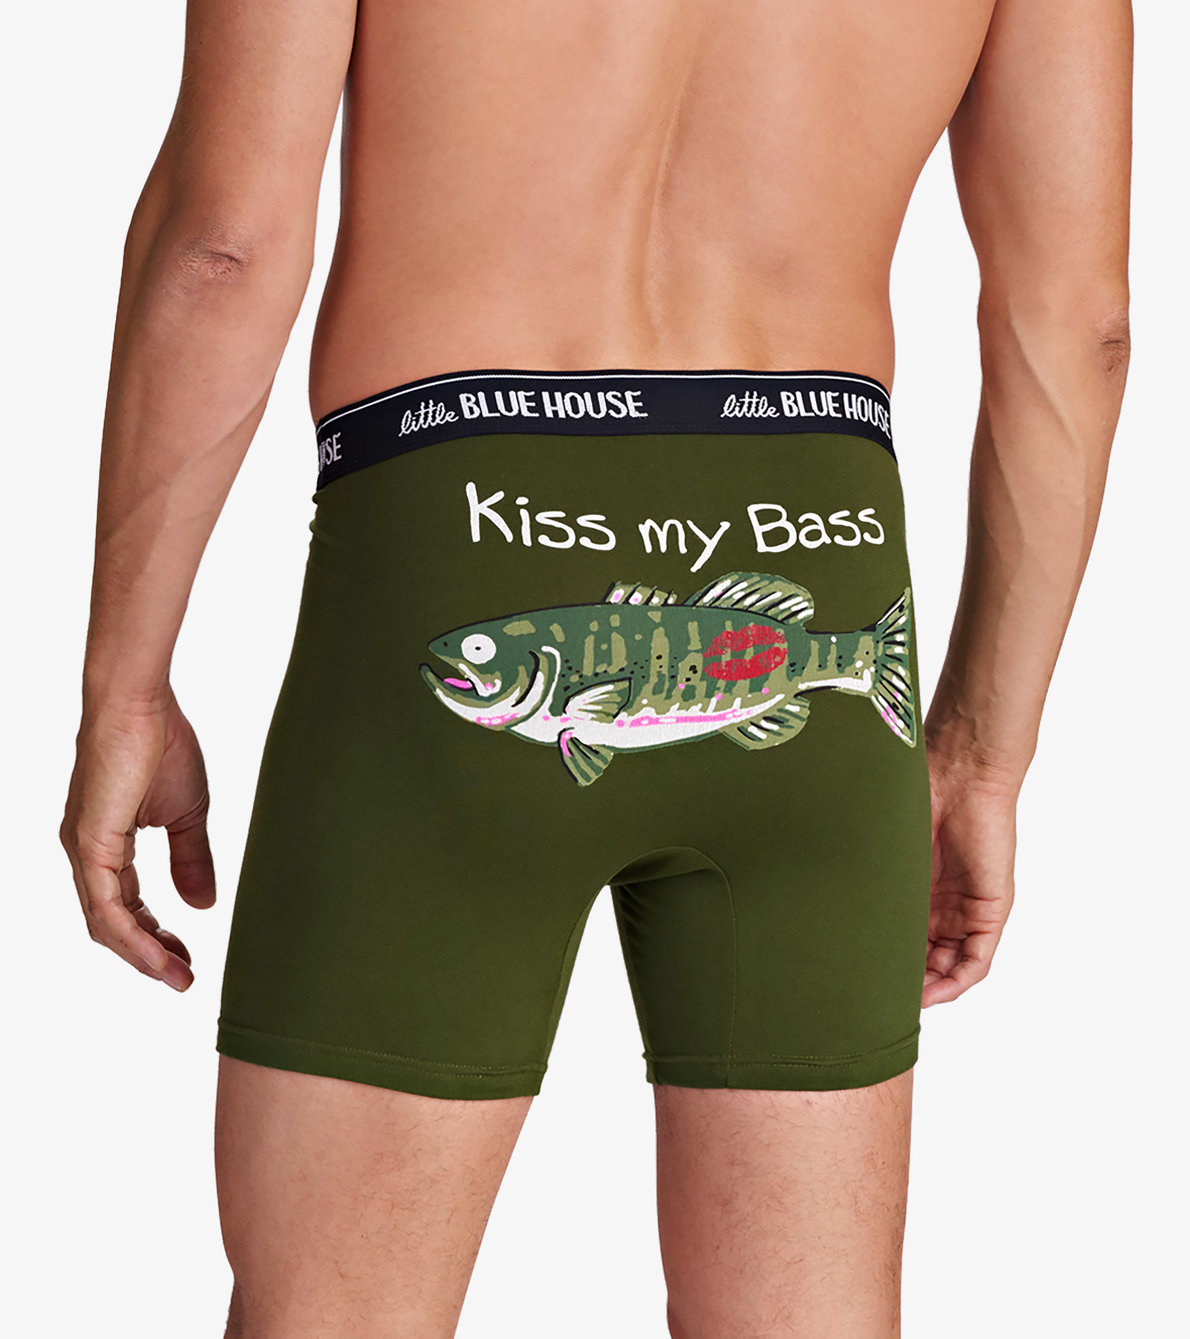 View larger image of Kiss my Bass Men's Boxer Briefs